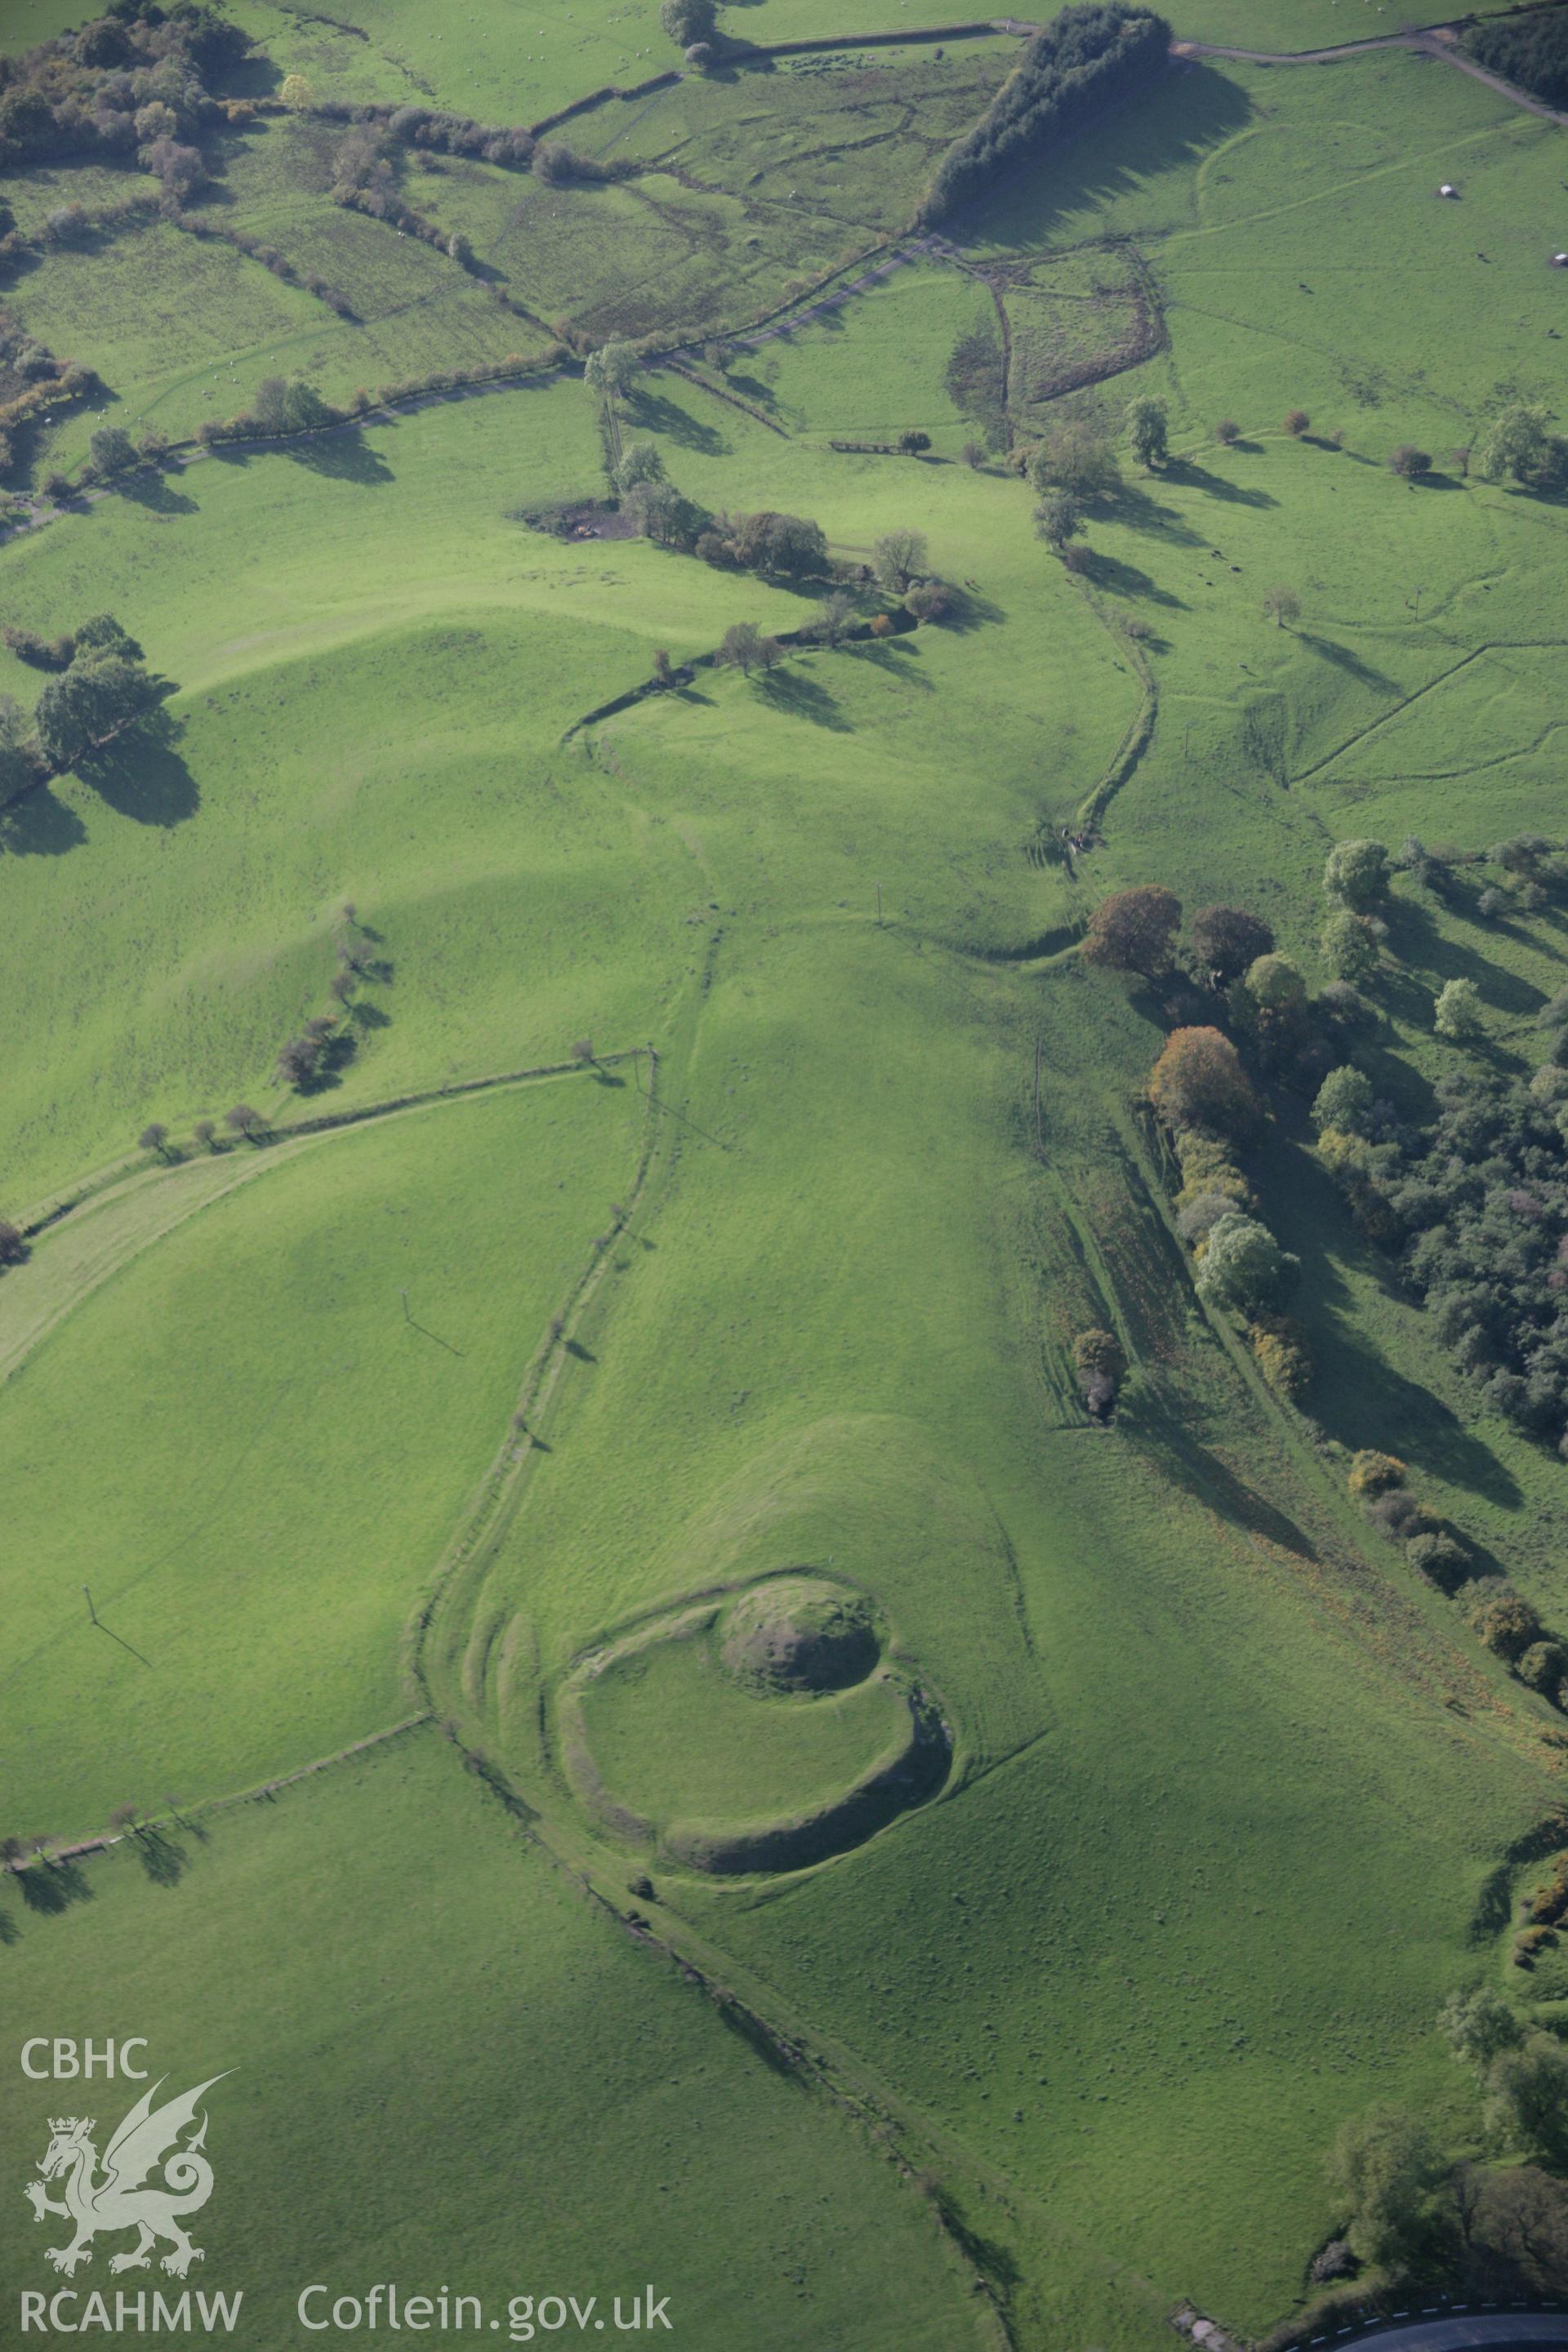 RCAHMW colour oblique aerial photograph of Castell Crugerydd from the east. Taken on 13 October 2005 by Toby Driver